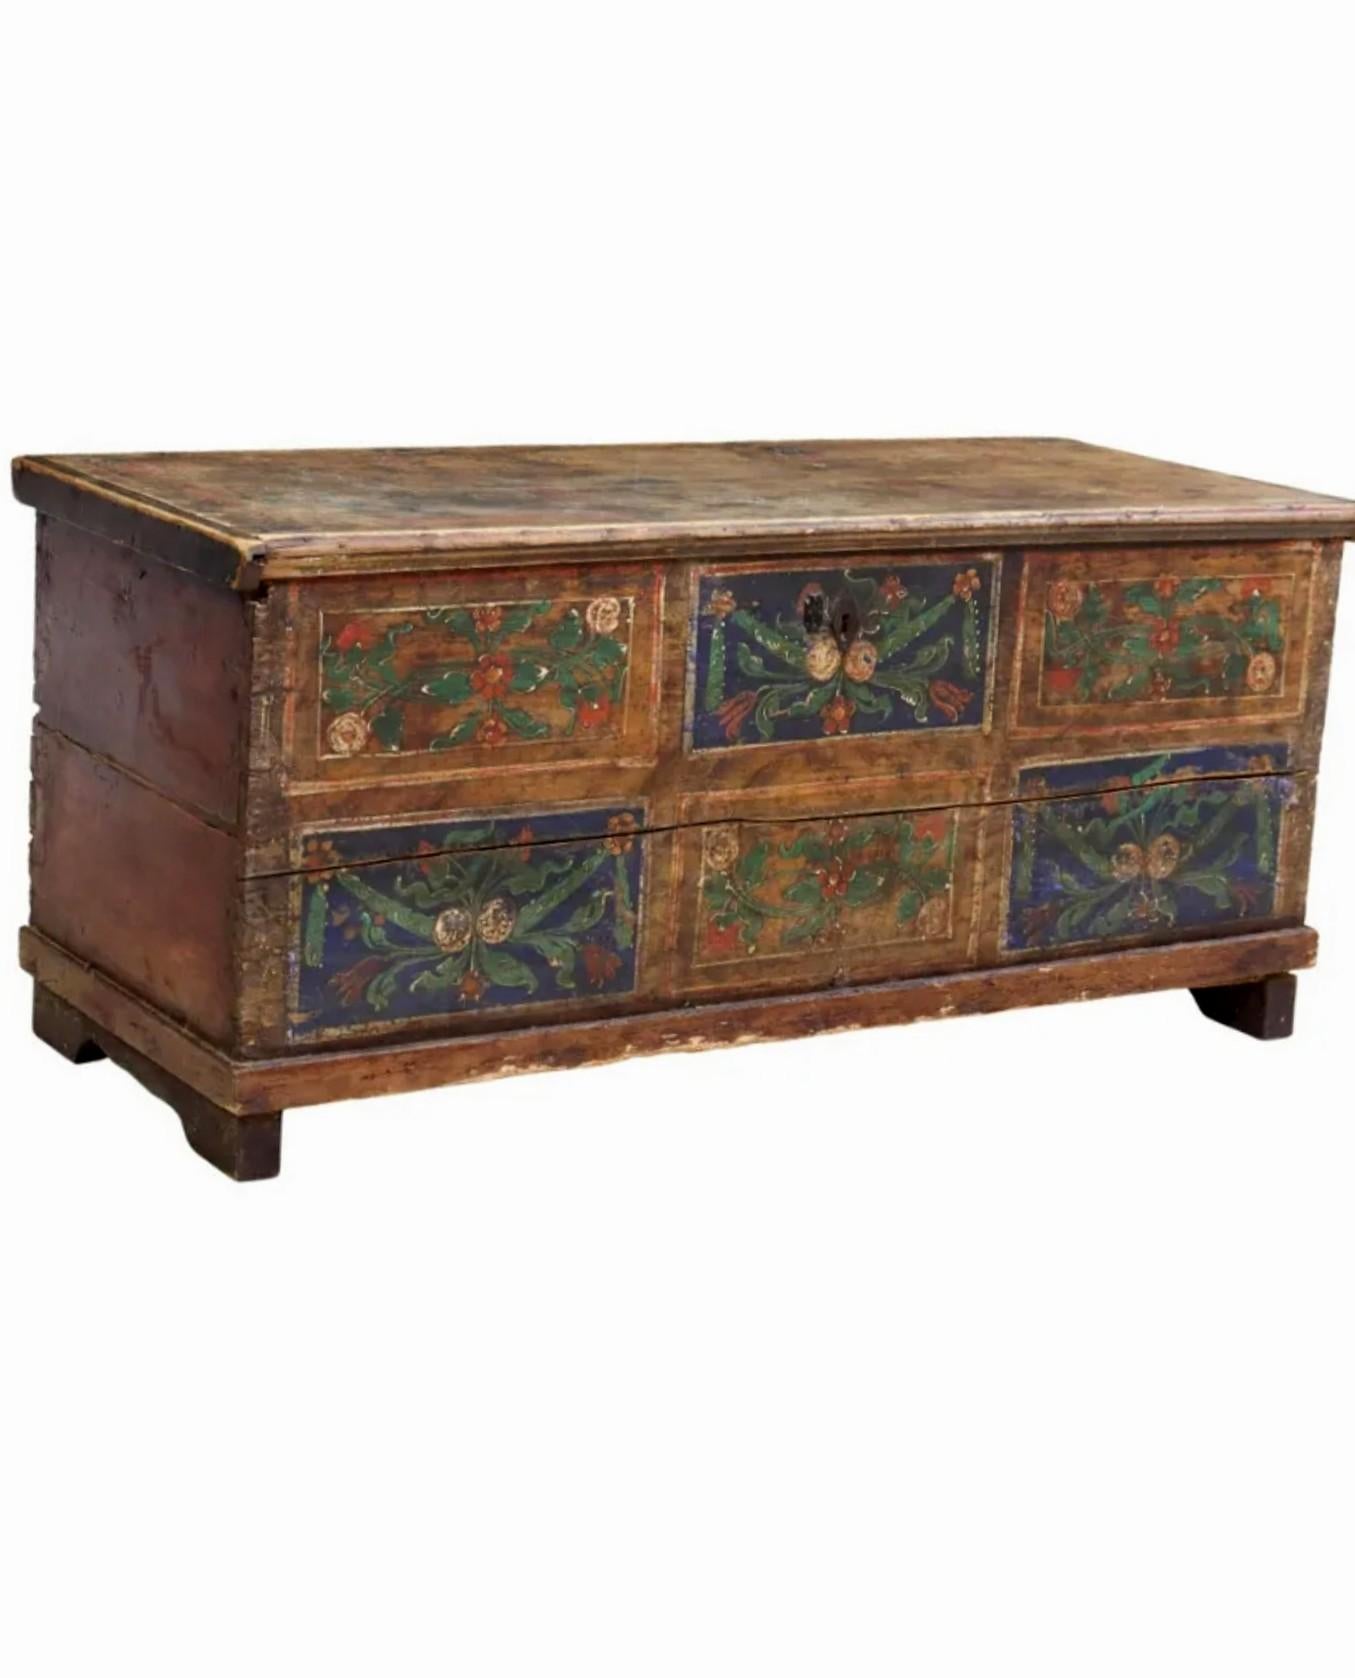 Country Early 19th Century Scandinavian Hand-Painted Pine Blanket Chest For Sale